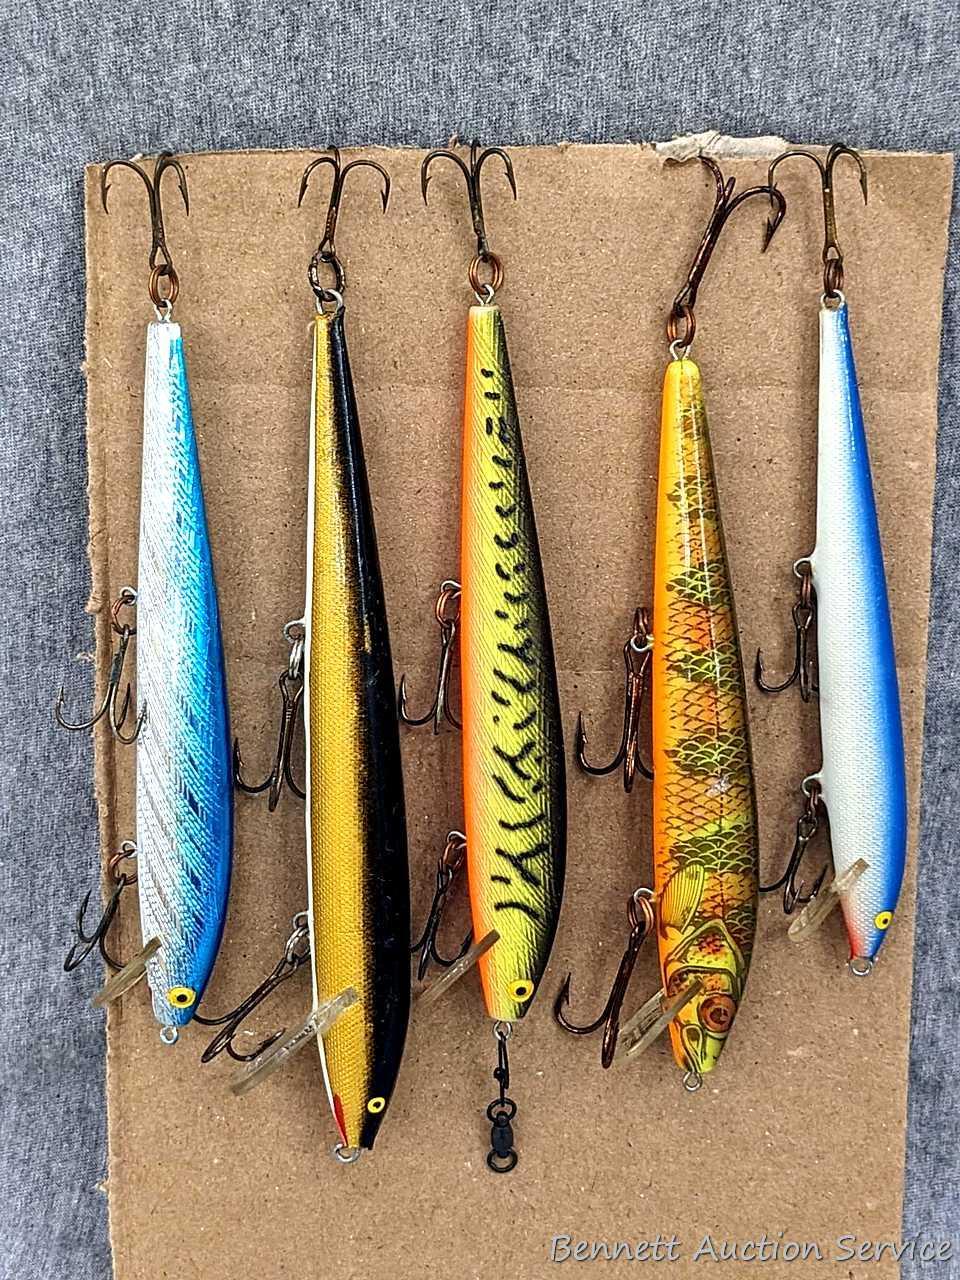 Rapala and Rebel hard fishing lures up to about